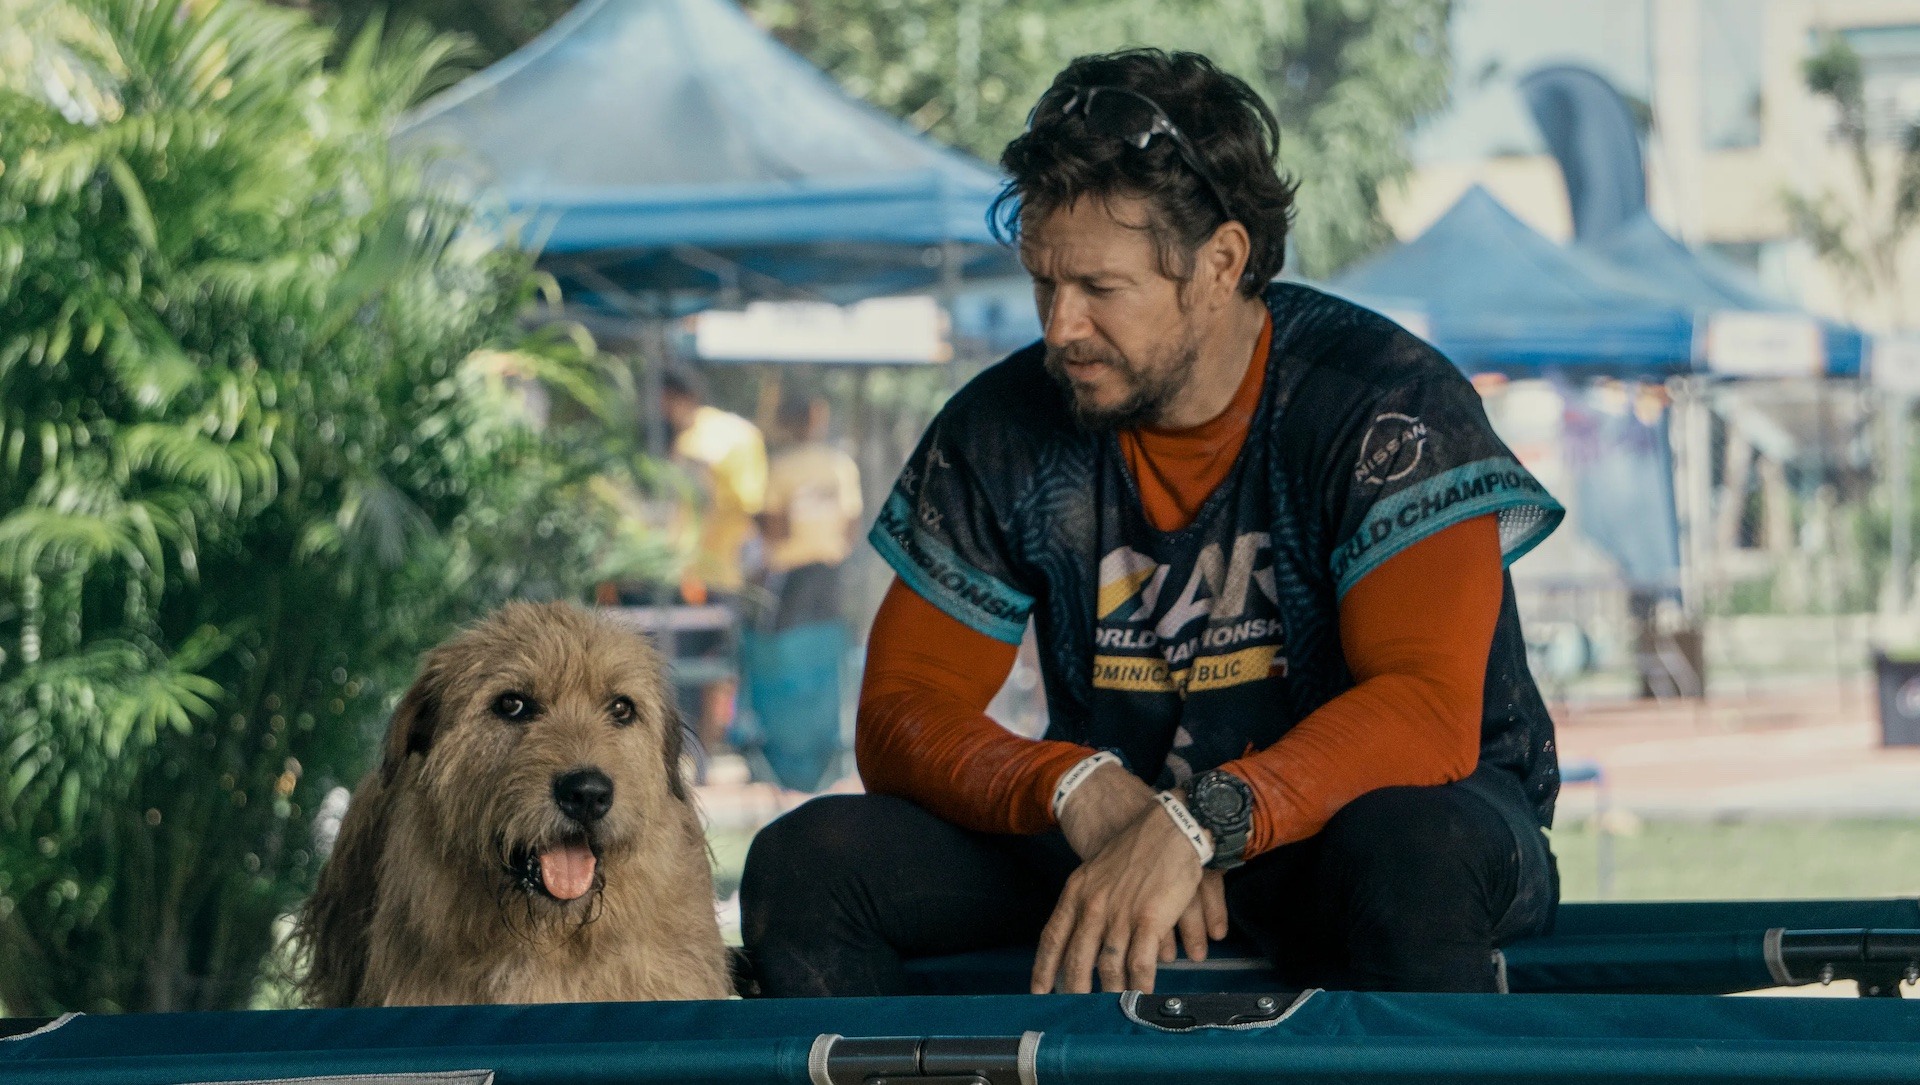 Mark Wahlberg as Michael Light with a dog during a race in 'Arthur the King'